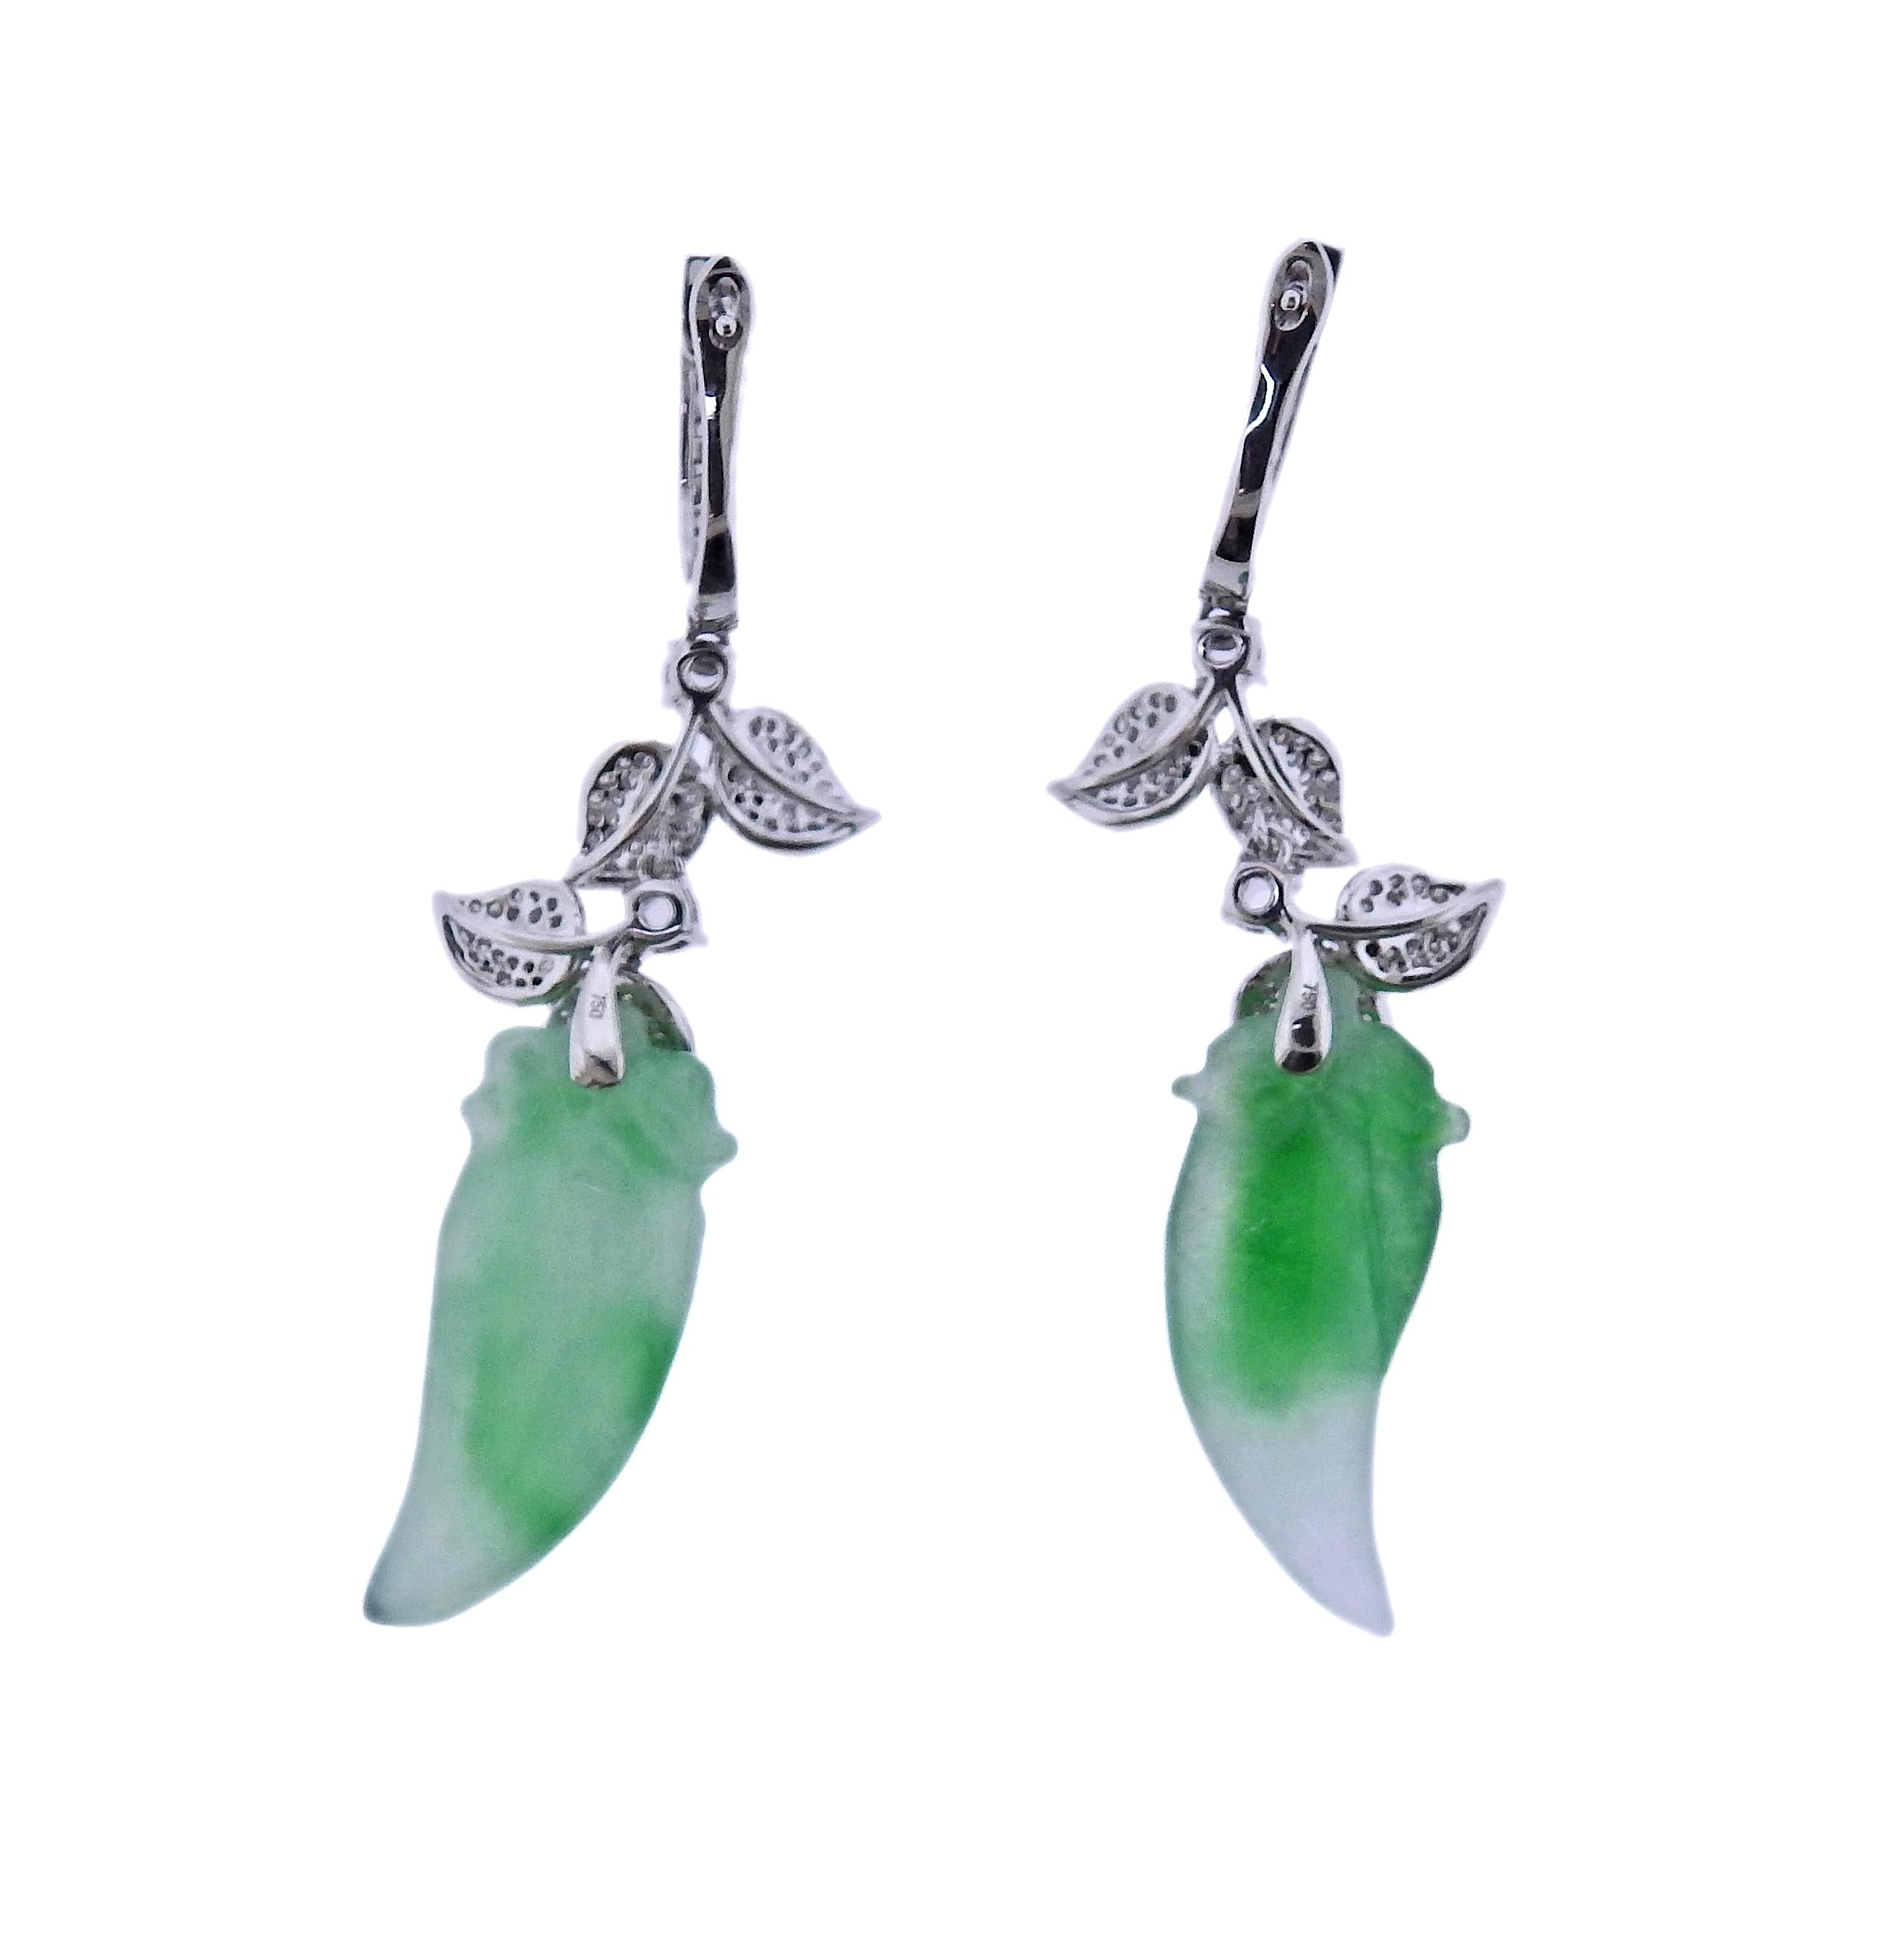 Pair of 18k gold drop earring, with 19.31ctw carved jadeite jade, and 0.81ctw diamonds. Earrings are 51mm long. Marked 750. Weight - 10.1 grams.